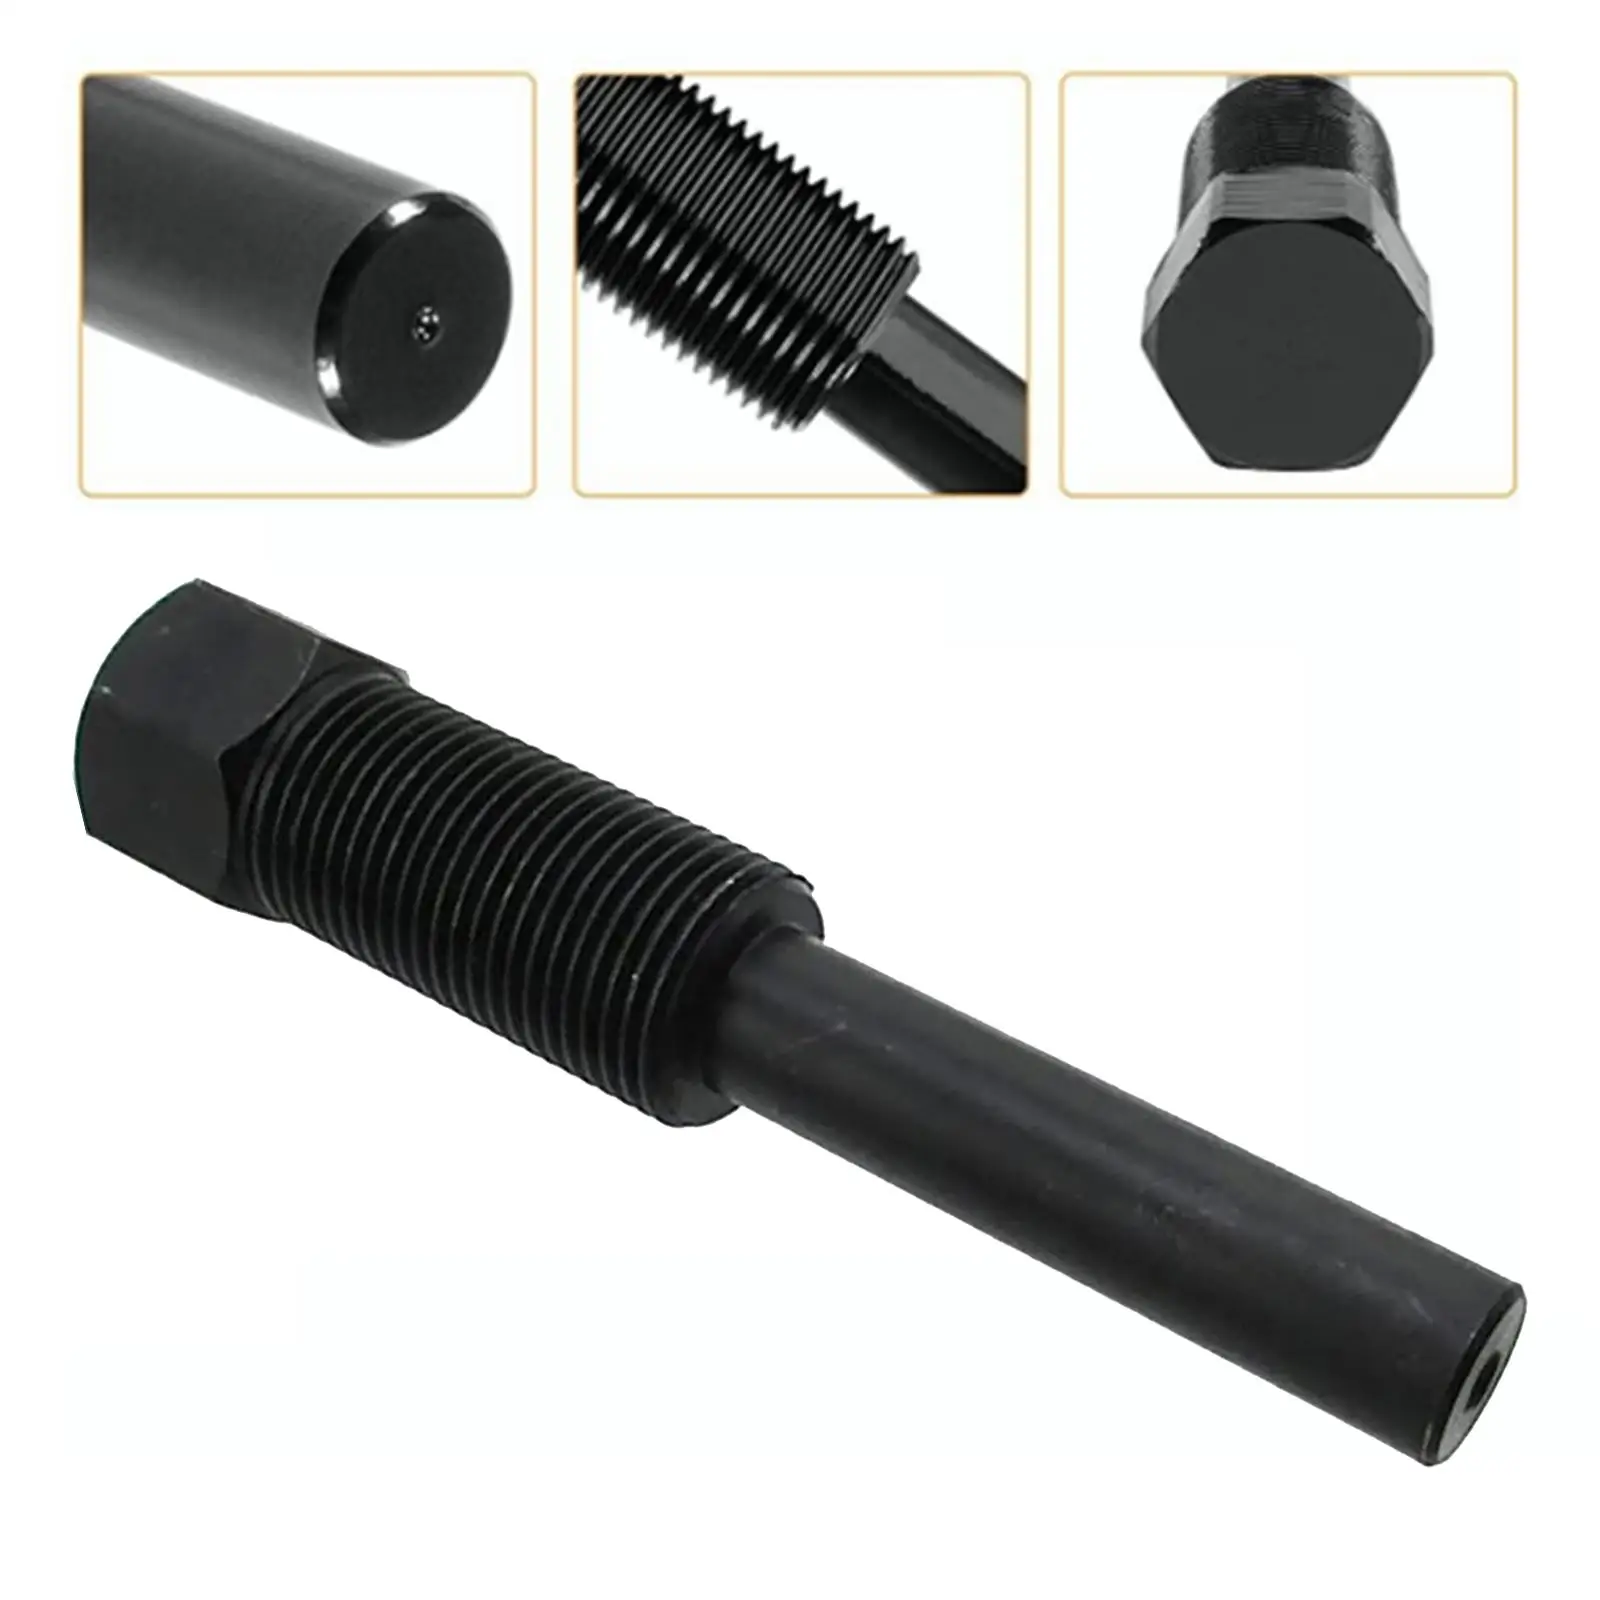 Secondary Drive Clutch Puller Remover Tool 2870903 Black Accessories Simple to Use Durable PP3077 for Polaris ATV 1985-2009